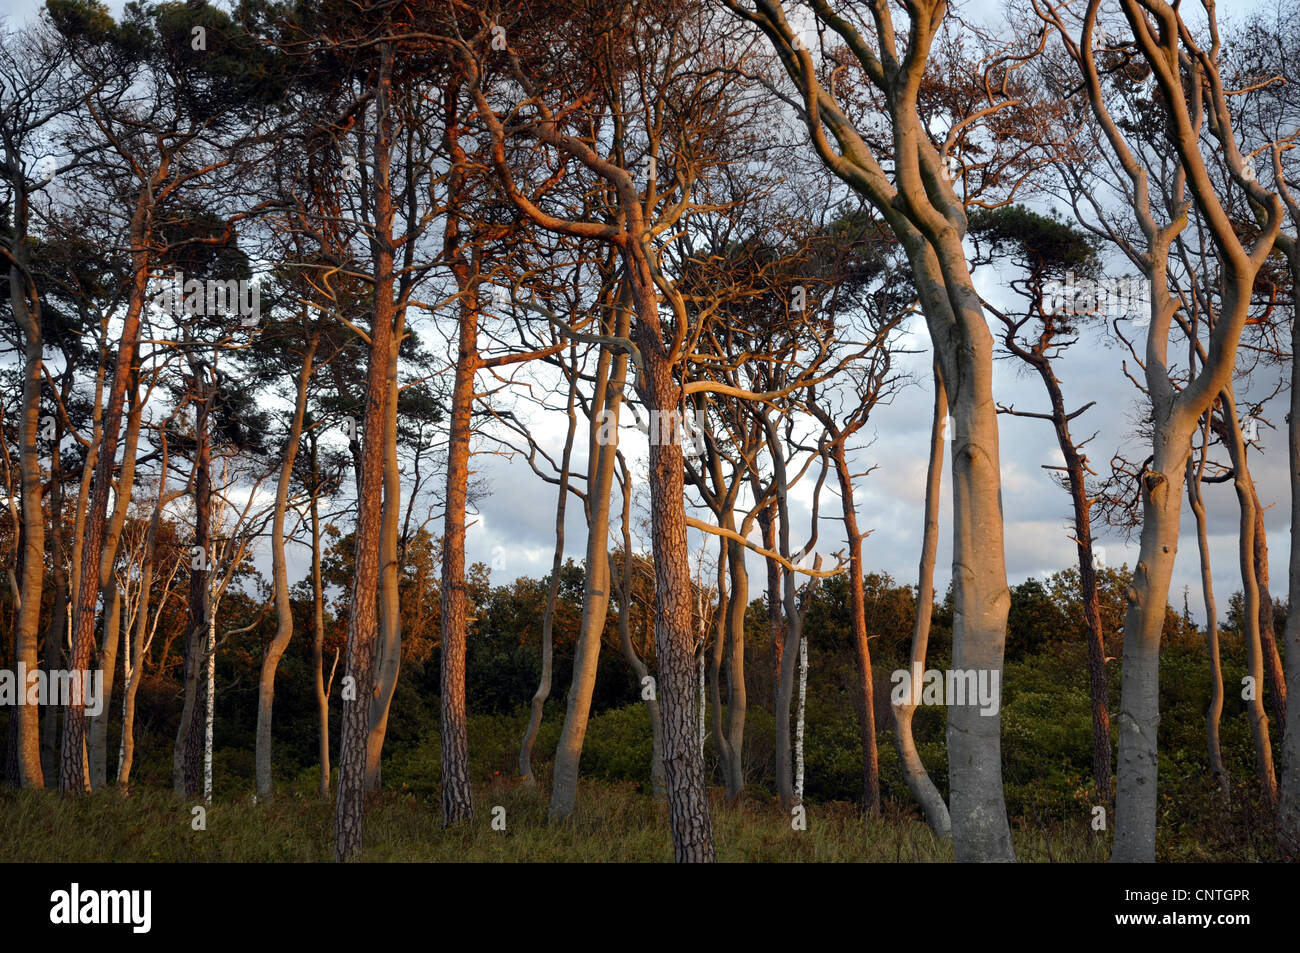 Scotch pine, scots pine (Pinus sylvestris), mixed forest in evening light, Germany, Mecklenburg Vorpommern, Western Pomerania Lagoon Area National Park Stock Photo